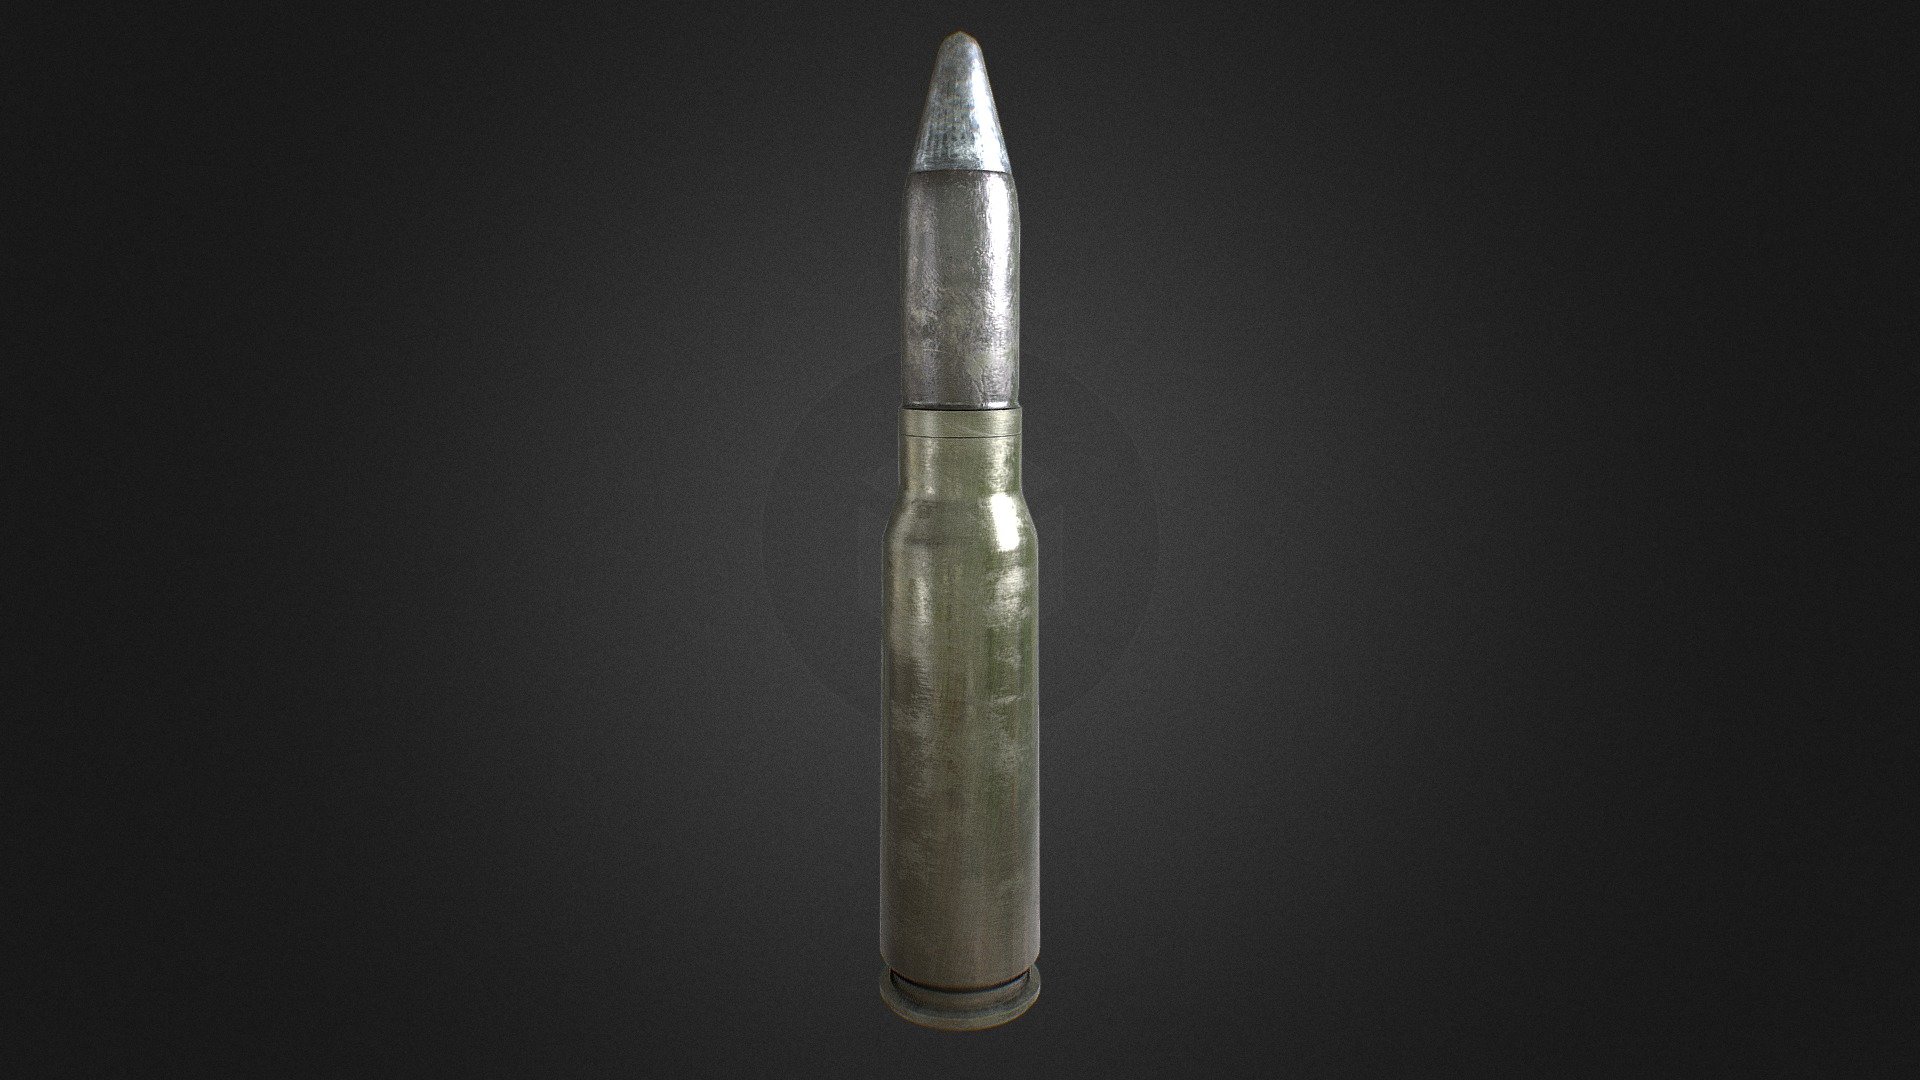 20mm Vulcan cannon shell:

Modelled in blender.

Exported and textured in Subsurface Paint.

Low poly 3d model